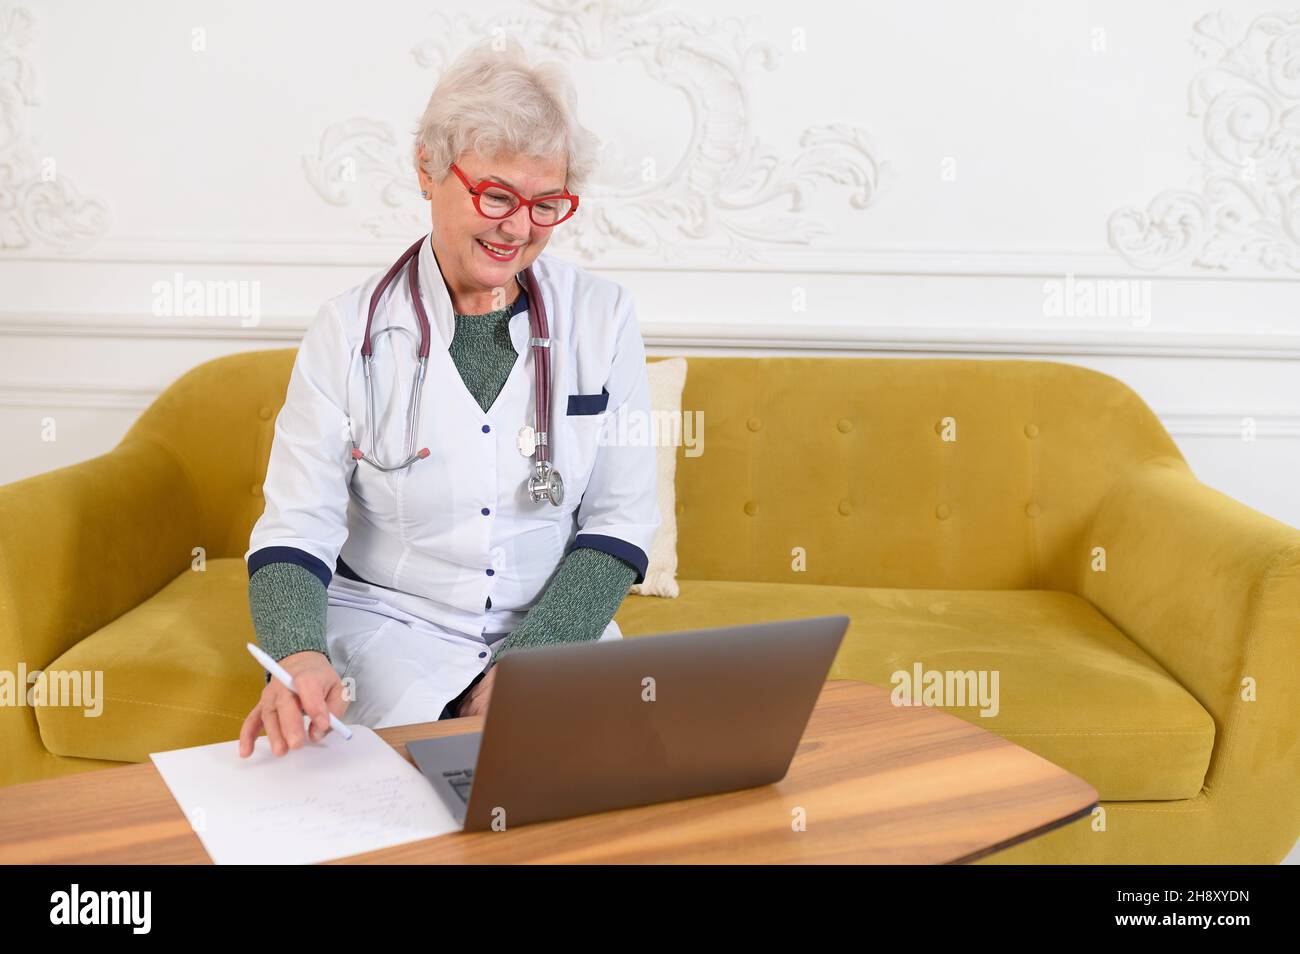 Smiling 60s middle aged female doctor looking at camera. Happy mature elegant old lady posing at hospital  Stock Photo